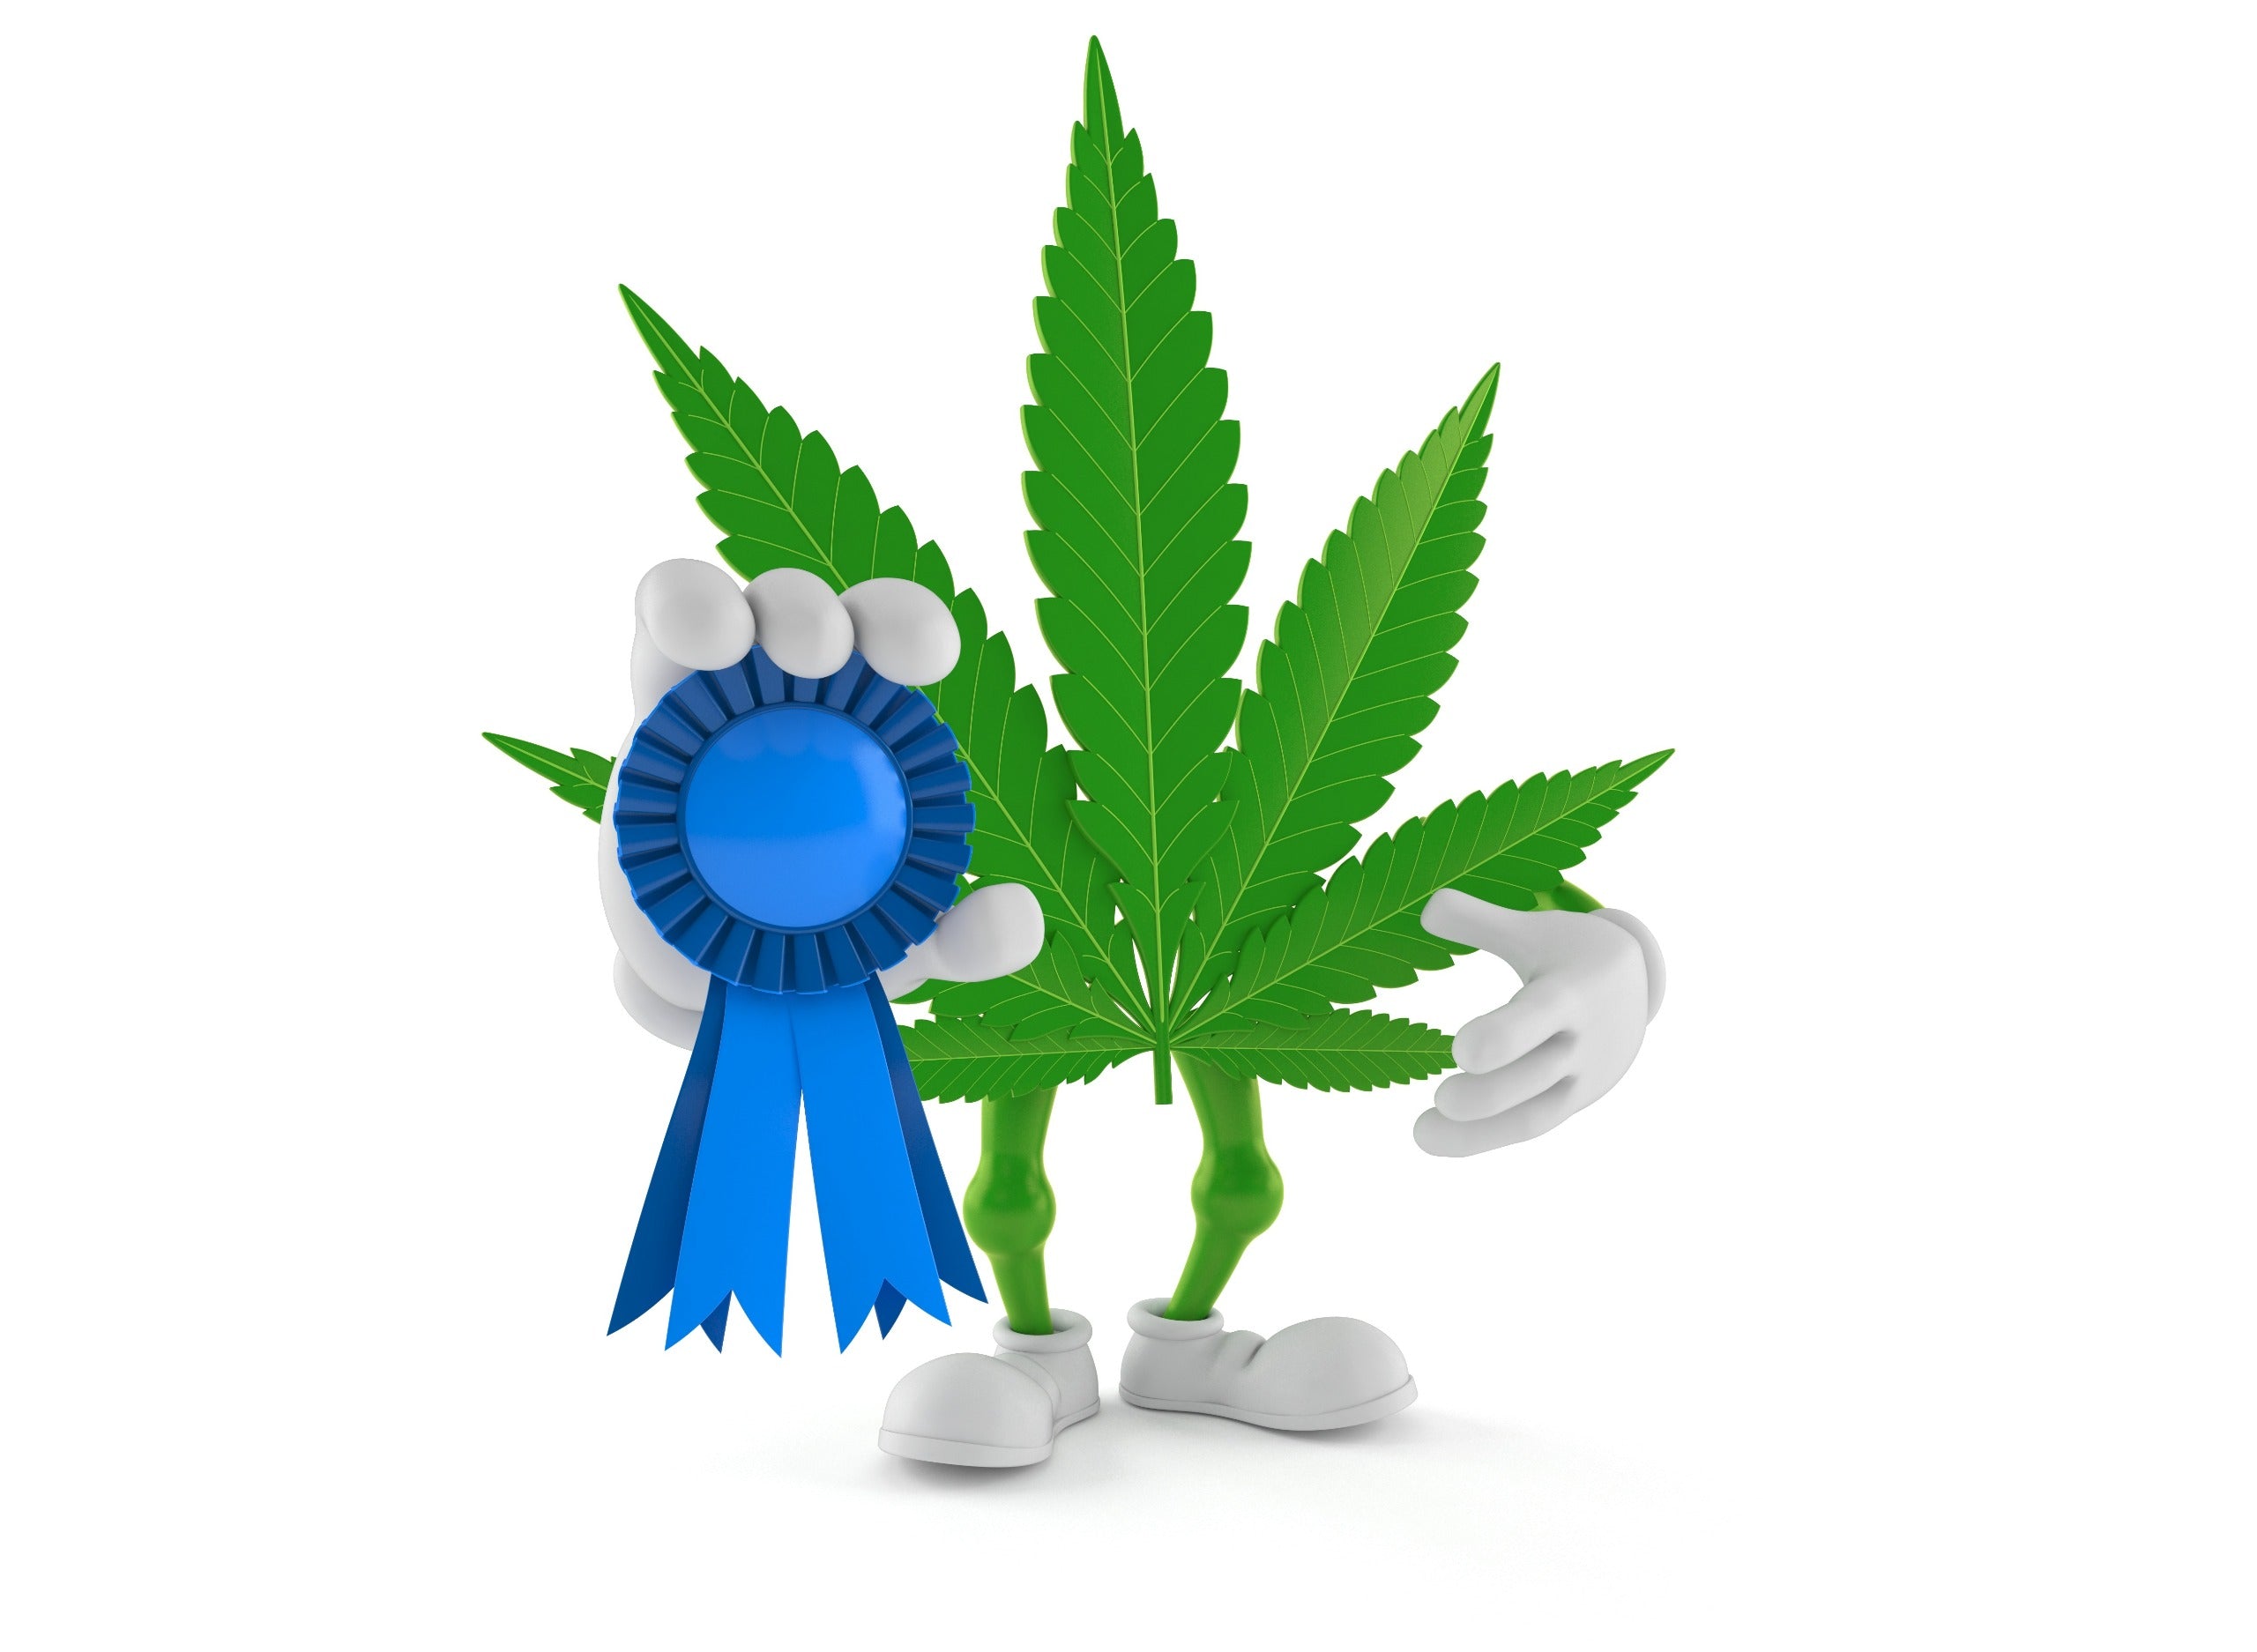 Cannabis Awards: What Competitions Are In the Industry?